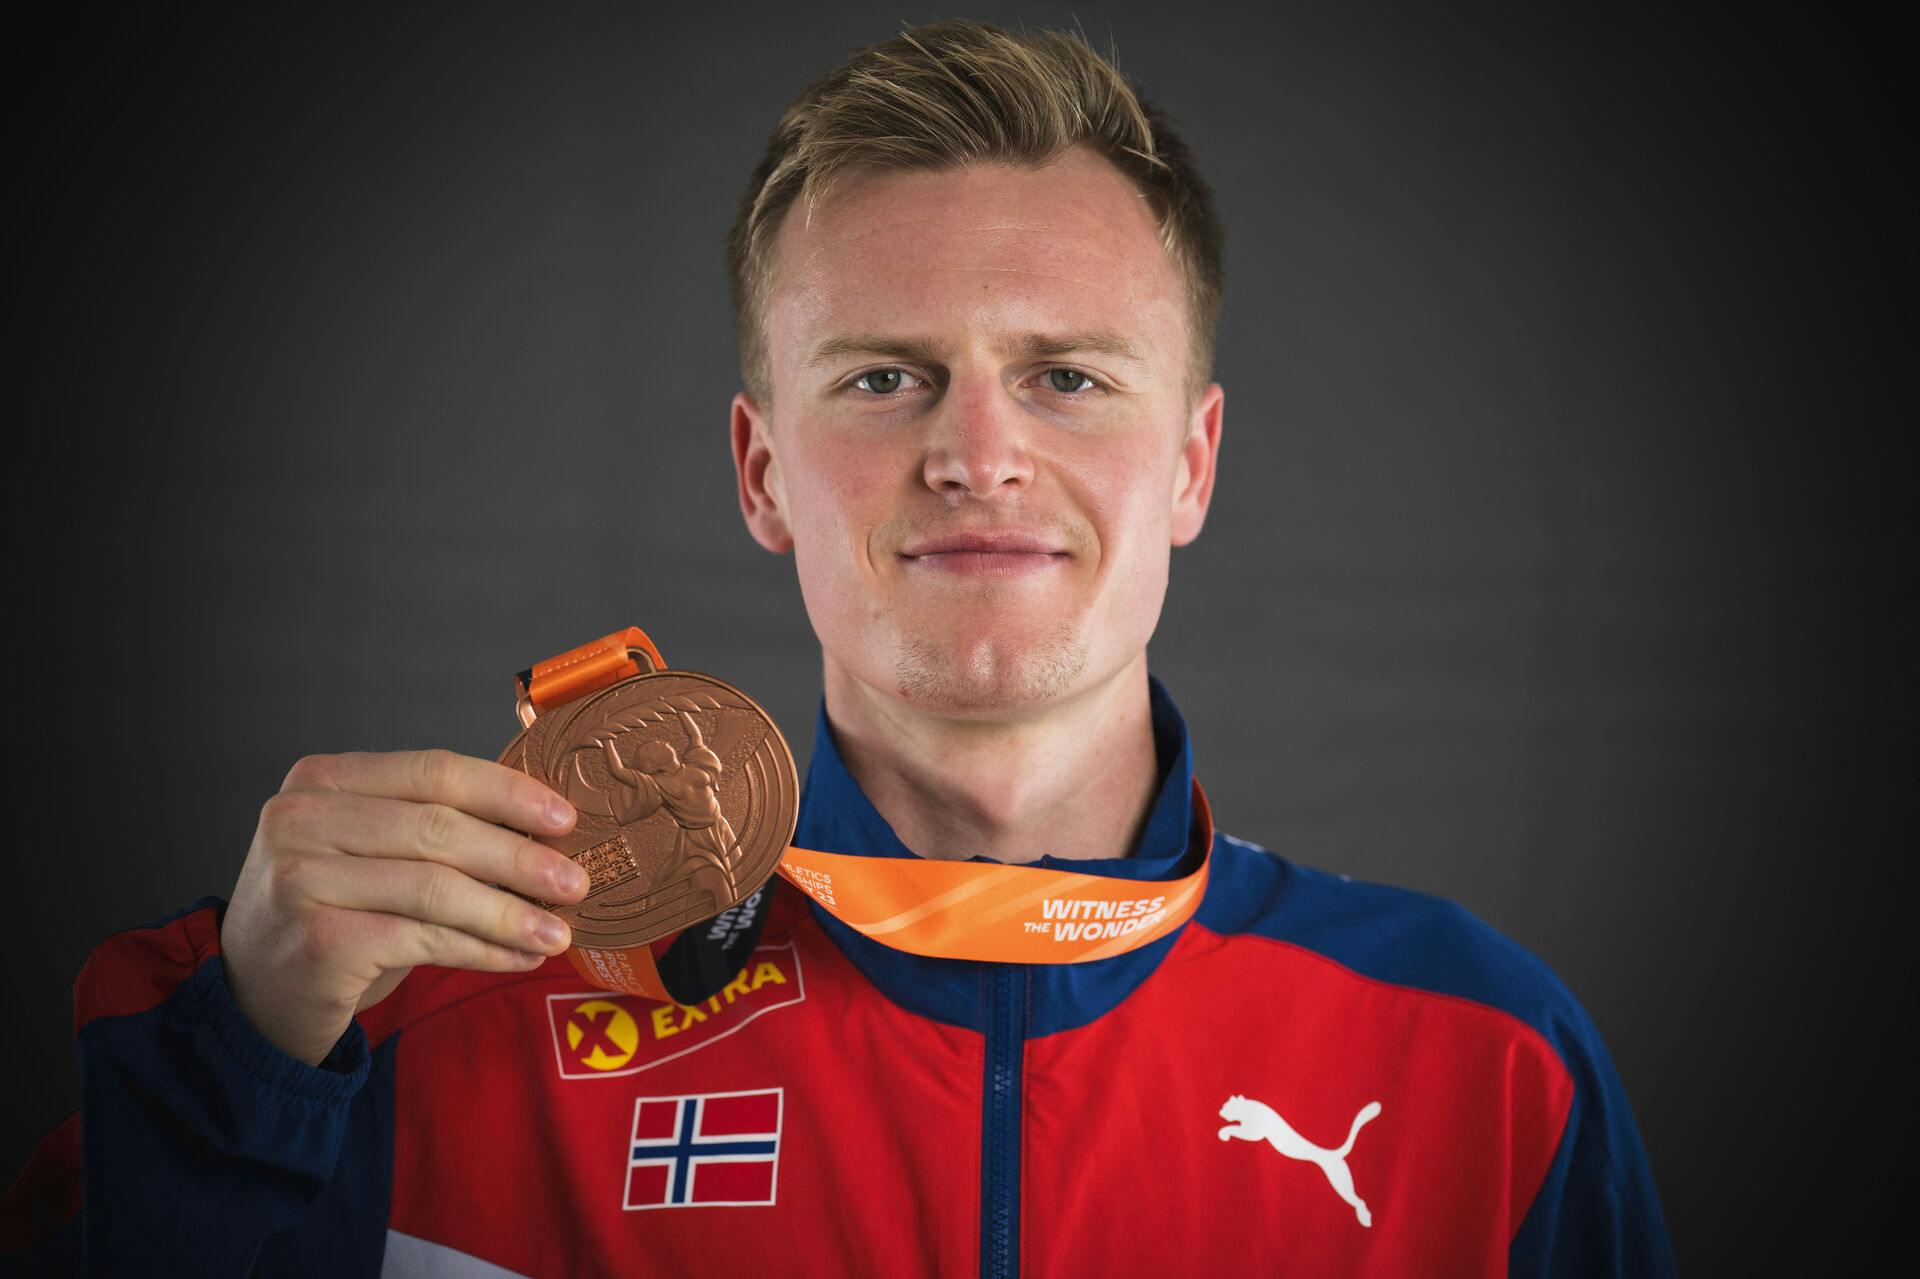 Men's 1500m bronze medallist Norway's Narve Gilje Nordas poses for portraits during a studio photo session on the sidelines of the World Athletics Championships at the National Athletics Centre in Budapest on August 25, 2023. ANDREJ ISAKOVIC / AFP